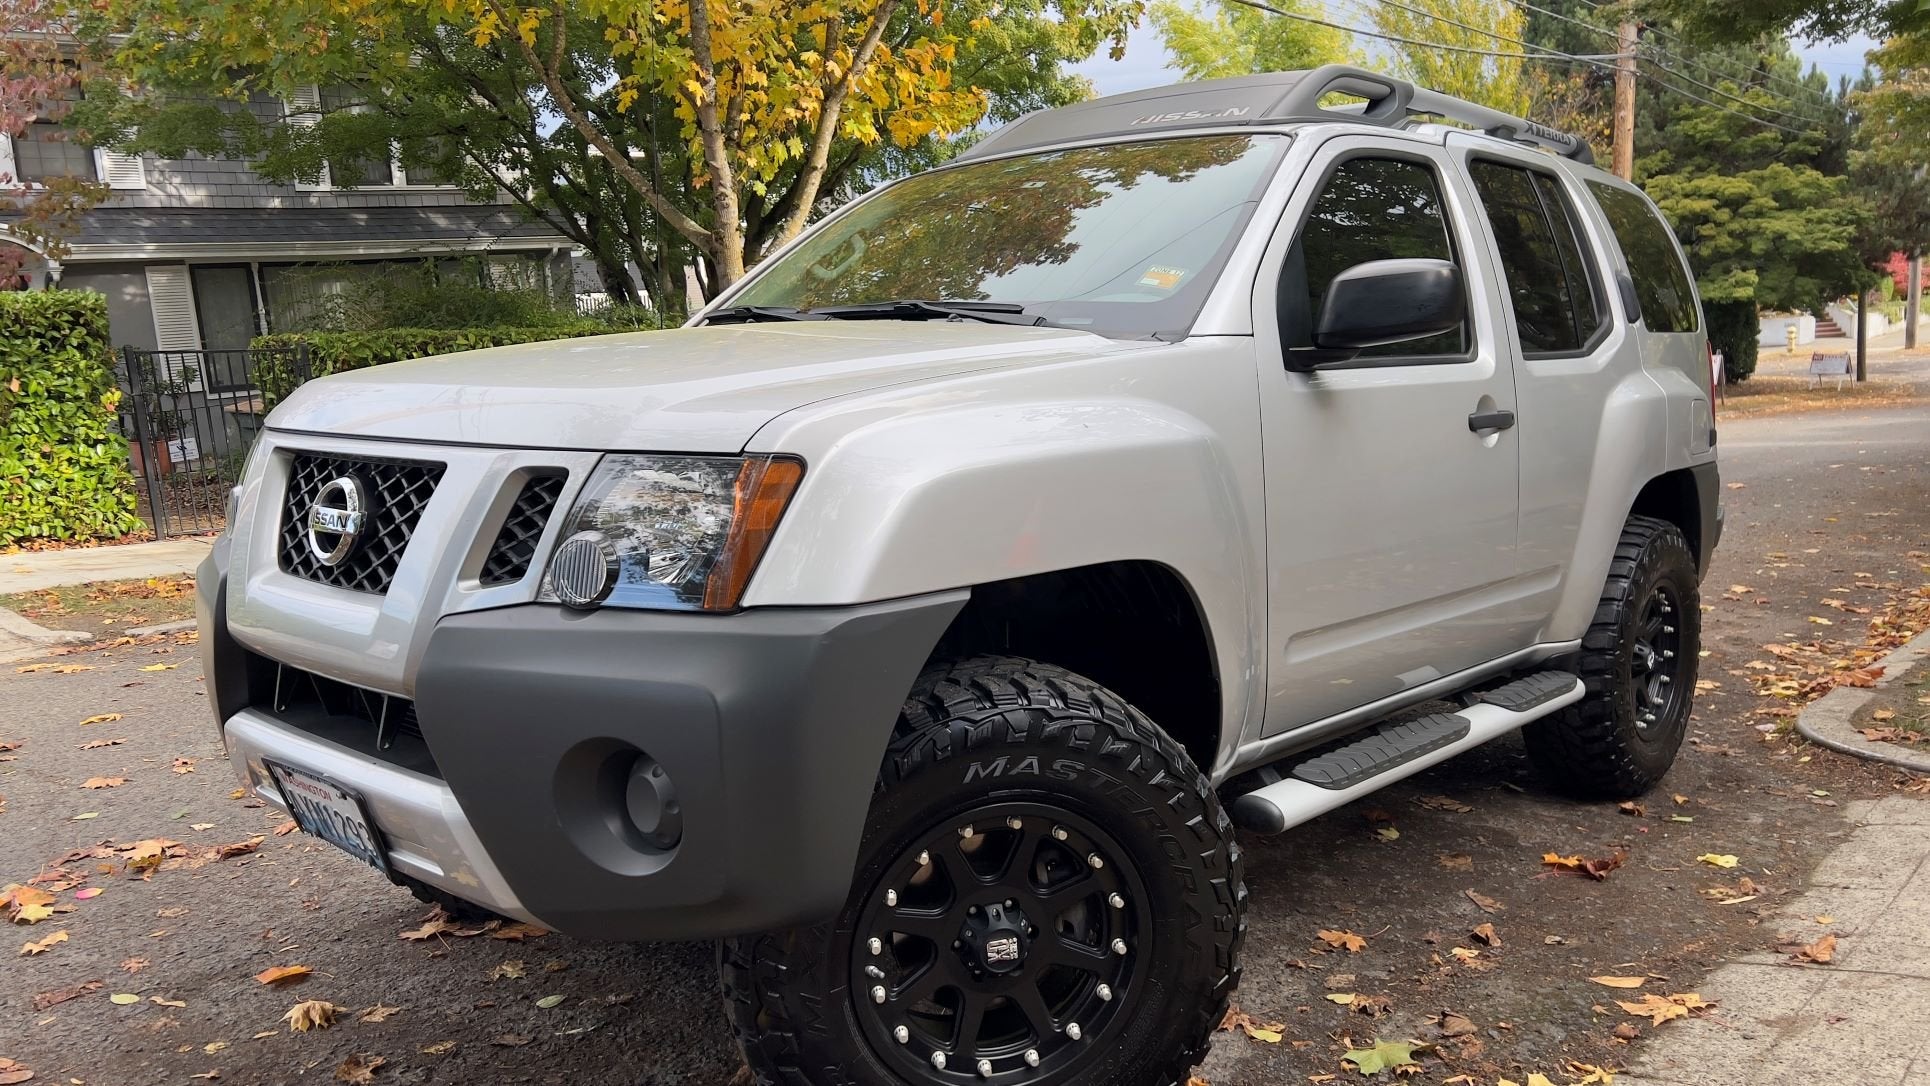 Low Mileage 2015 XTerra S 4WD, suspension, tires and rack